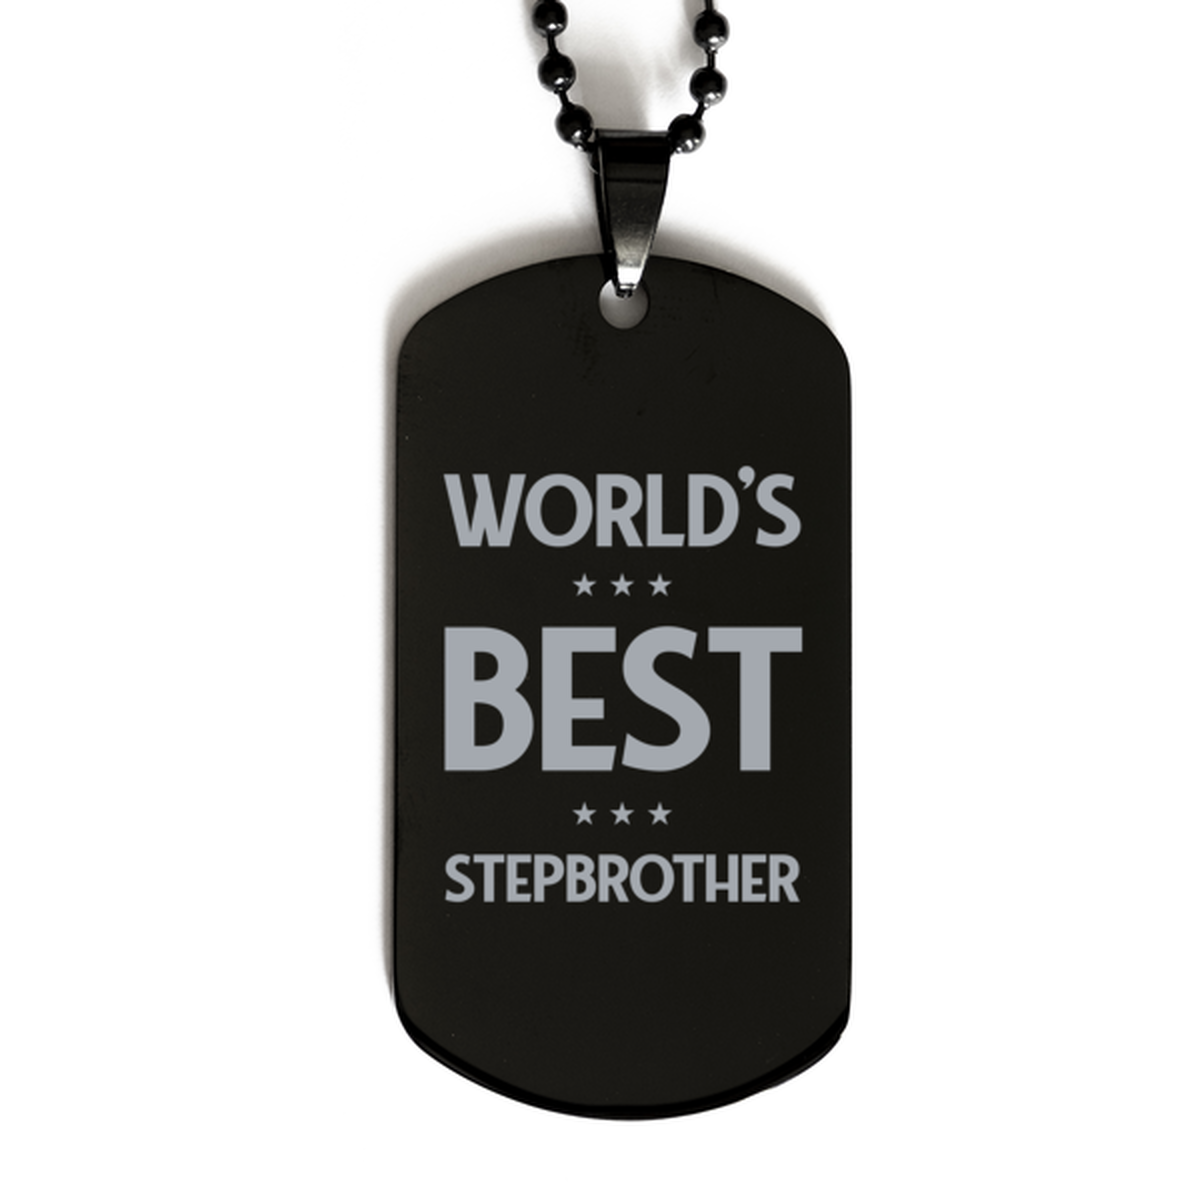 Worlds Best Stepbrother Gifts, Funny Black Engraved Dog Tag For Stepbrother, Birthday Presents For Men